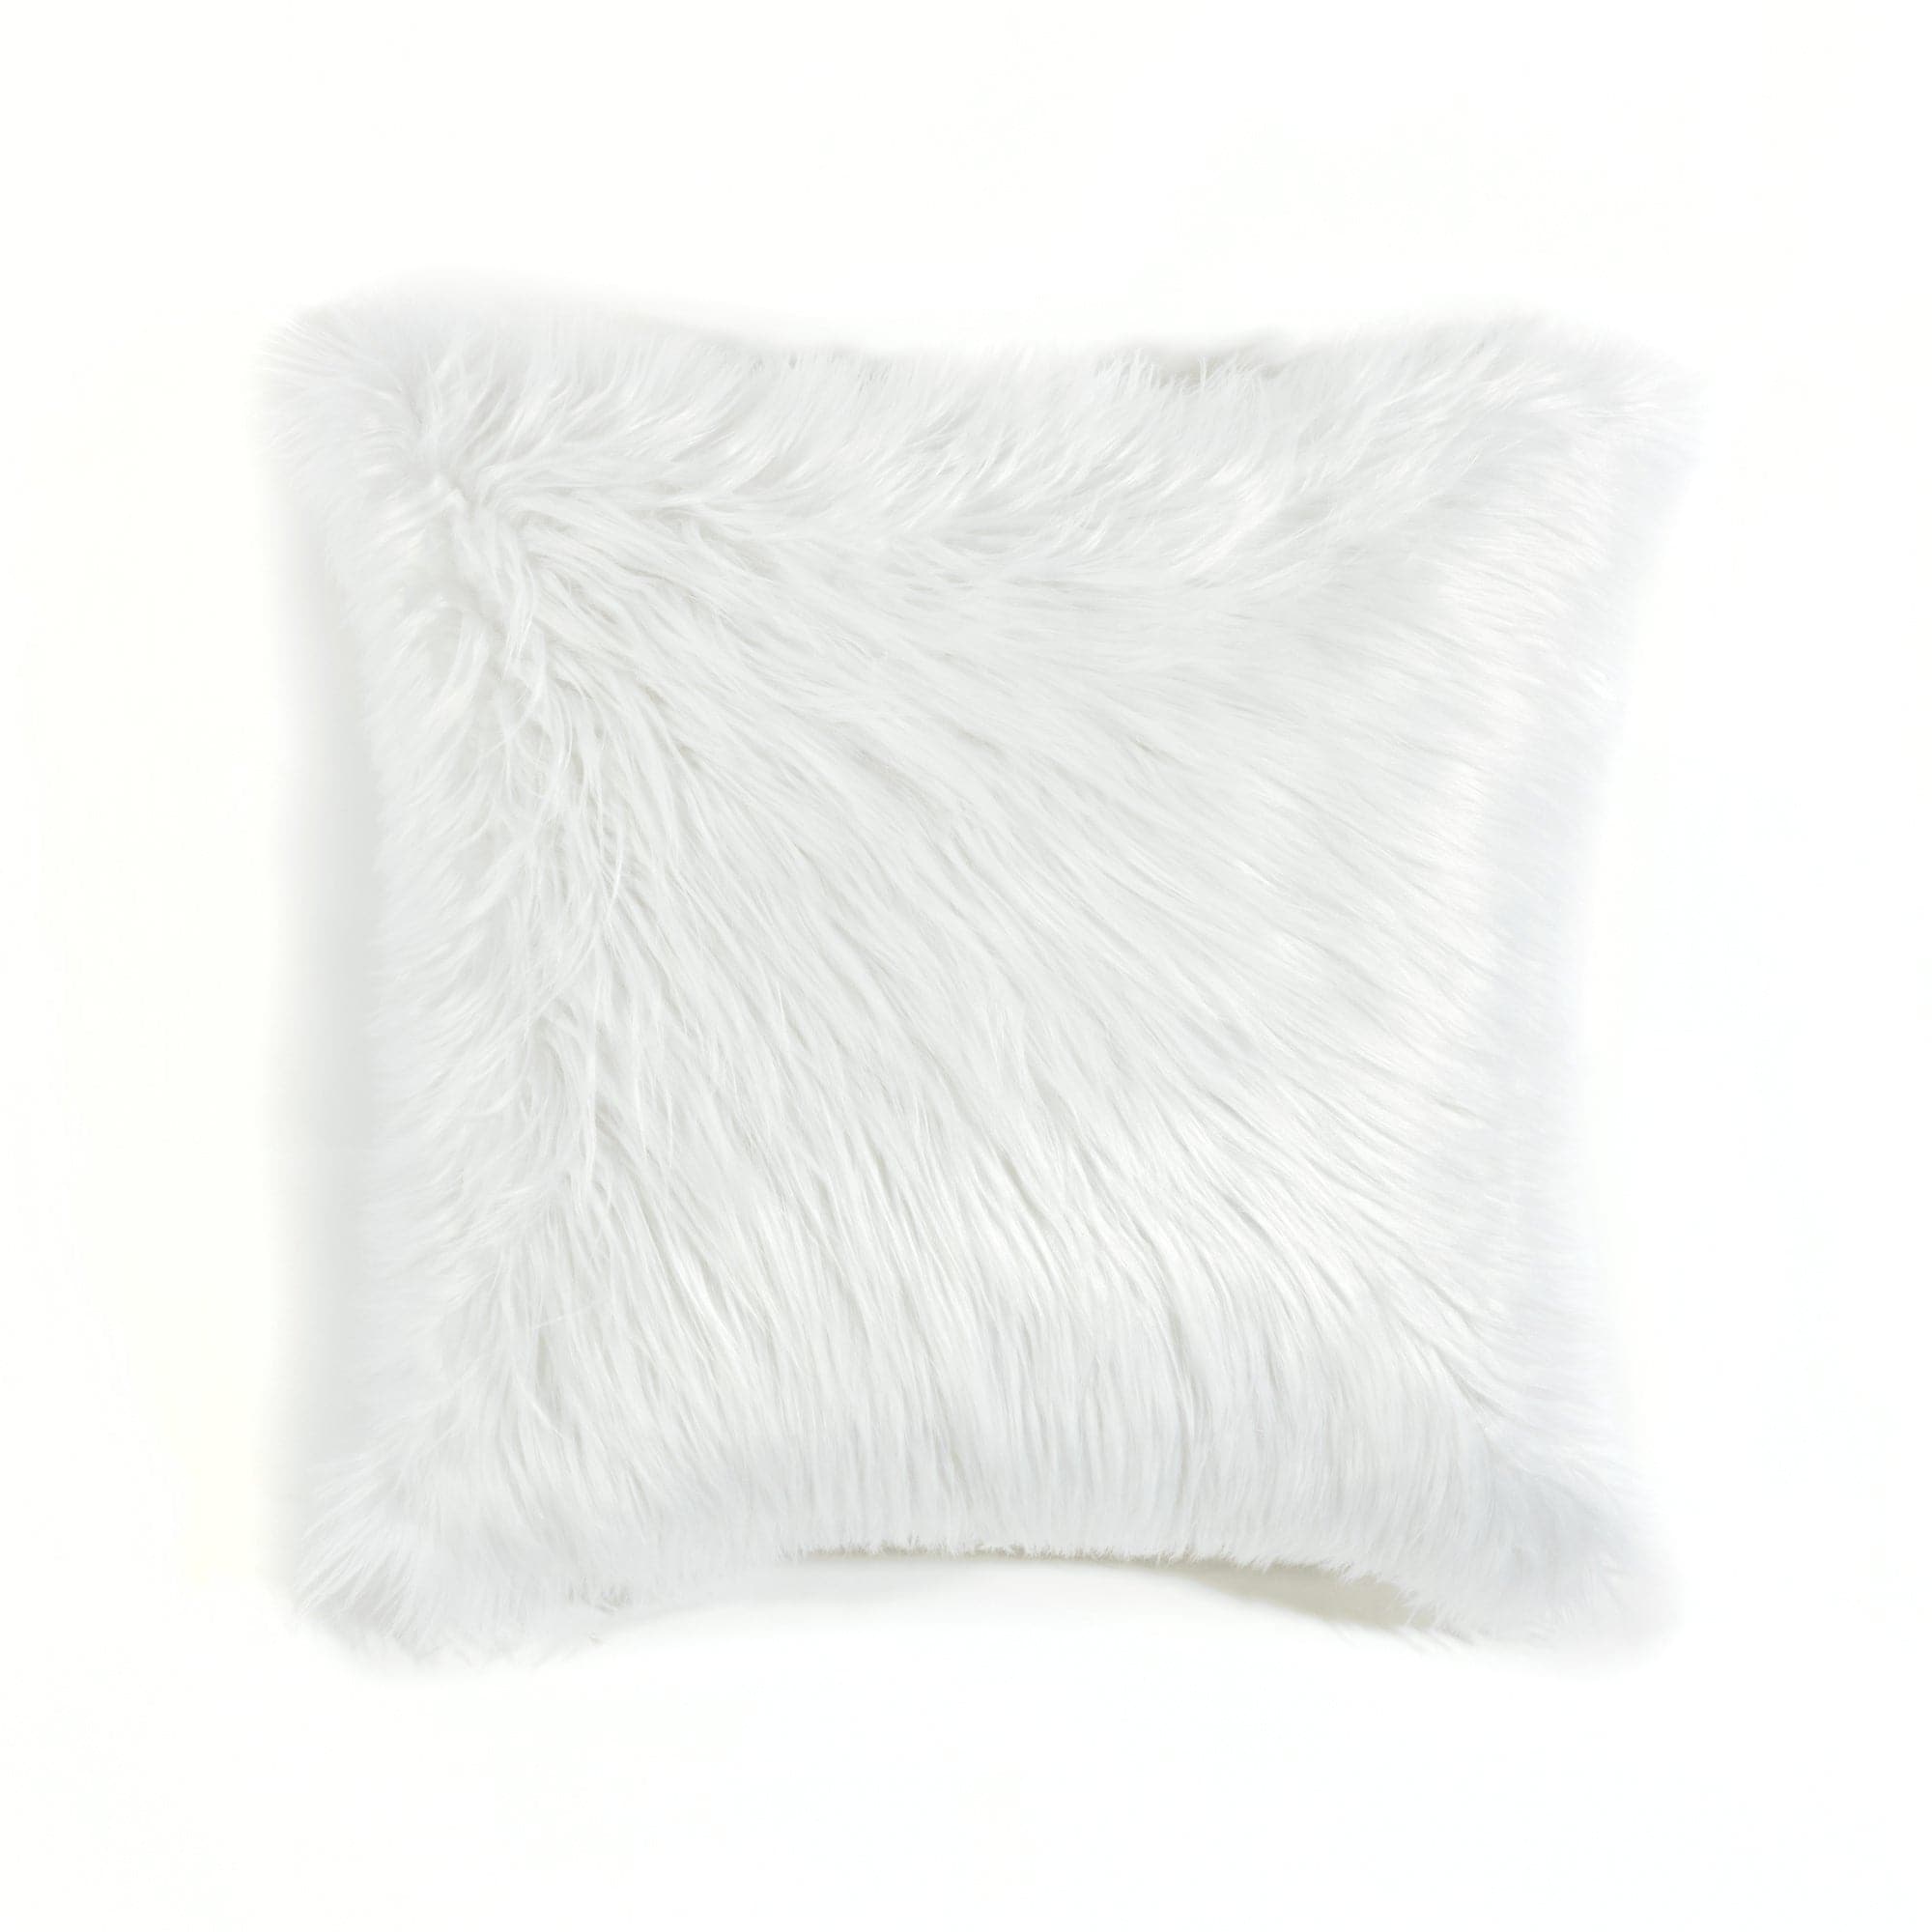 Luxury Decorative Mongolian Soft Fuzzy Faux Fur Fluffy Cushion Pillow Case  for Bedroom and Couch - China Cushion Case and Long Fur price